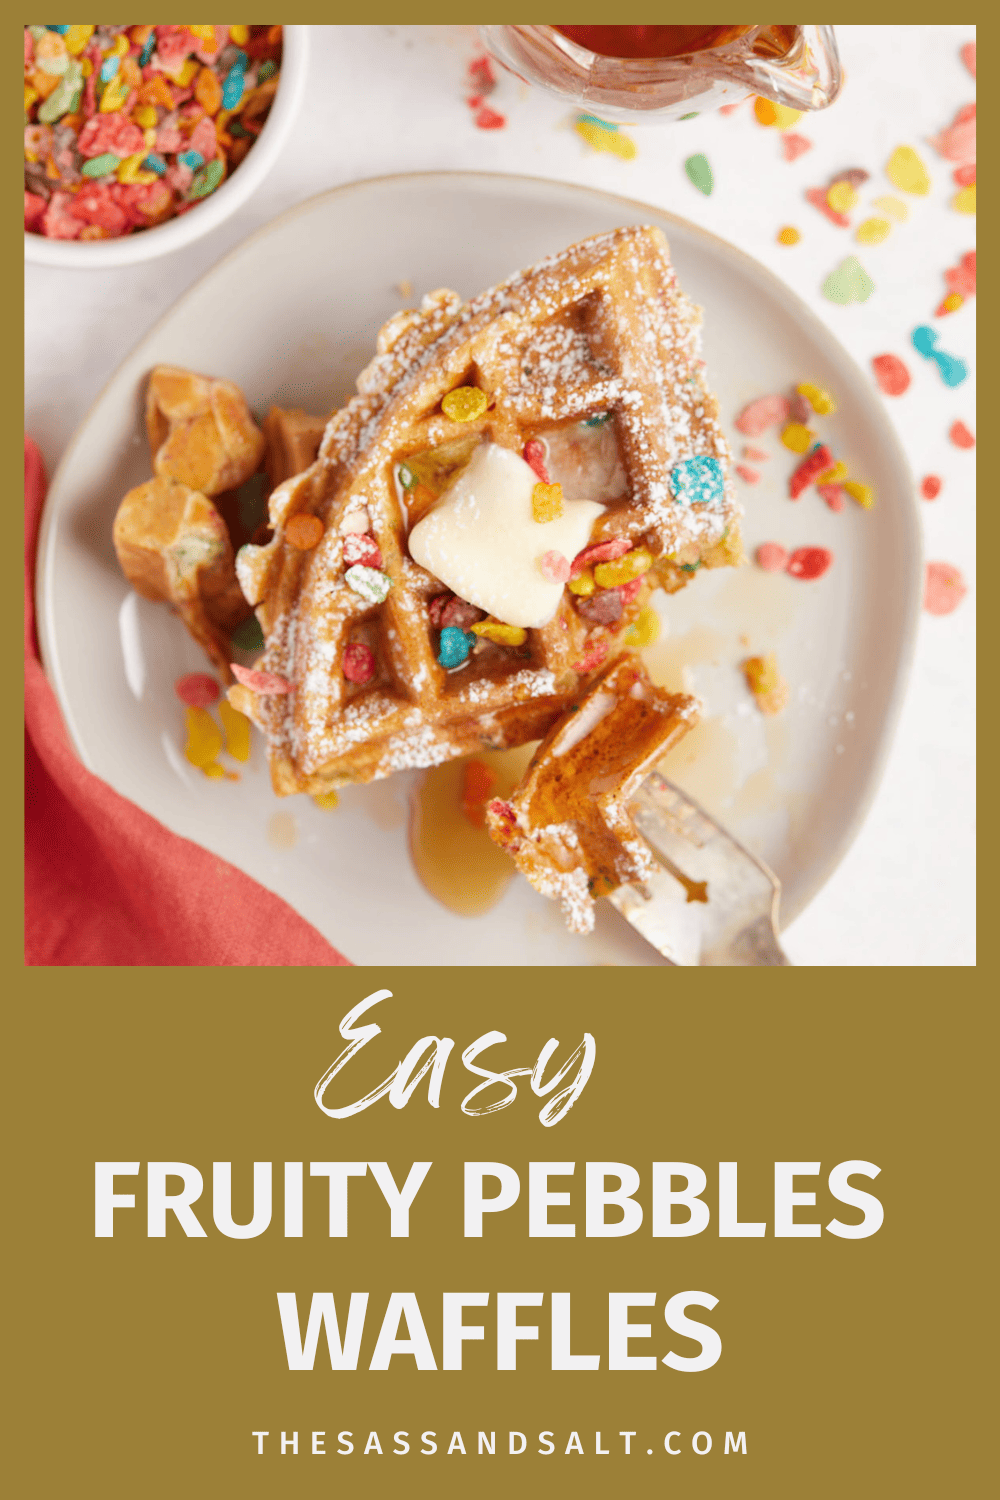 A plate of Fruity Pebbles waffles topped with colorful fruity pebbles cereal, a sprinkle of powdered sugar, and a drizzle of maple syrup.